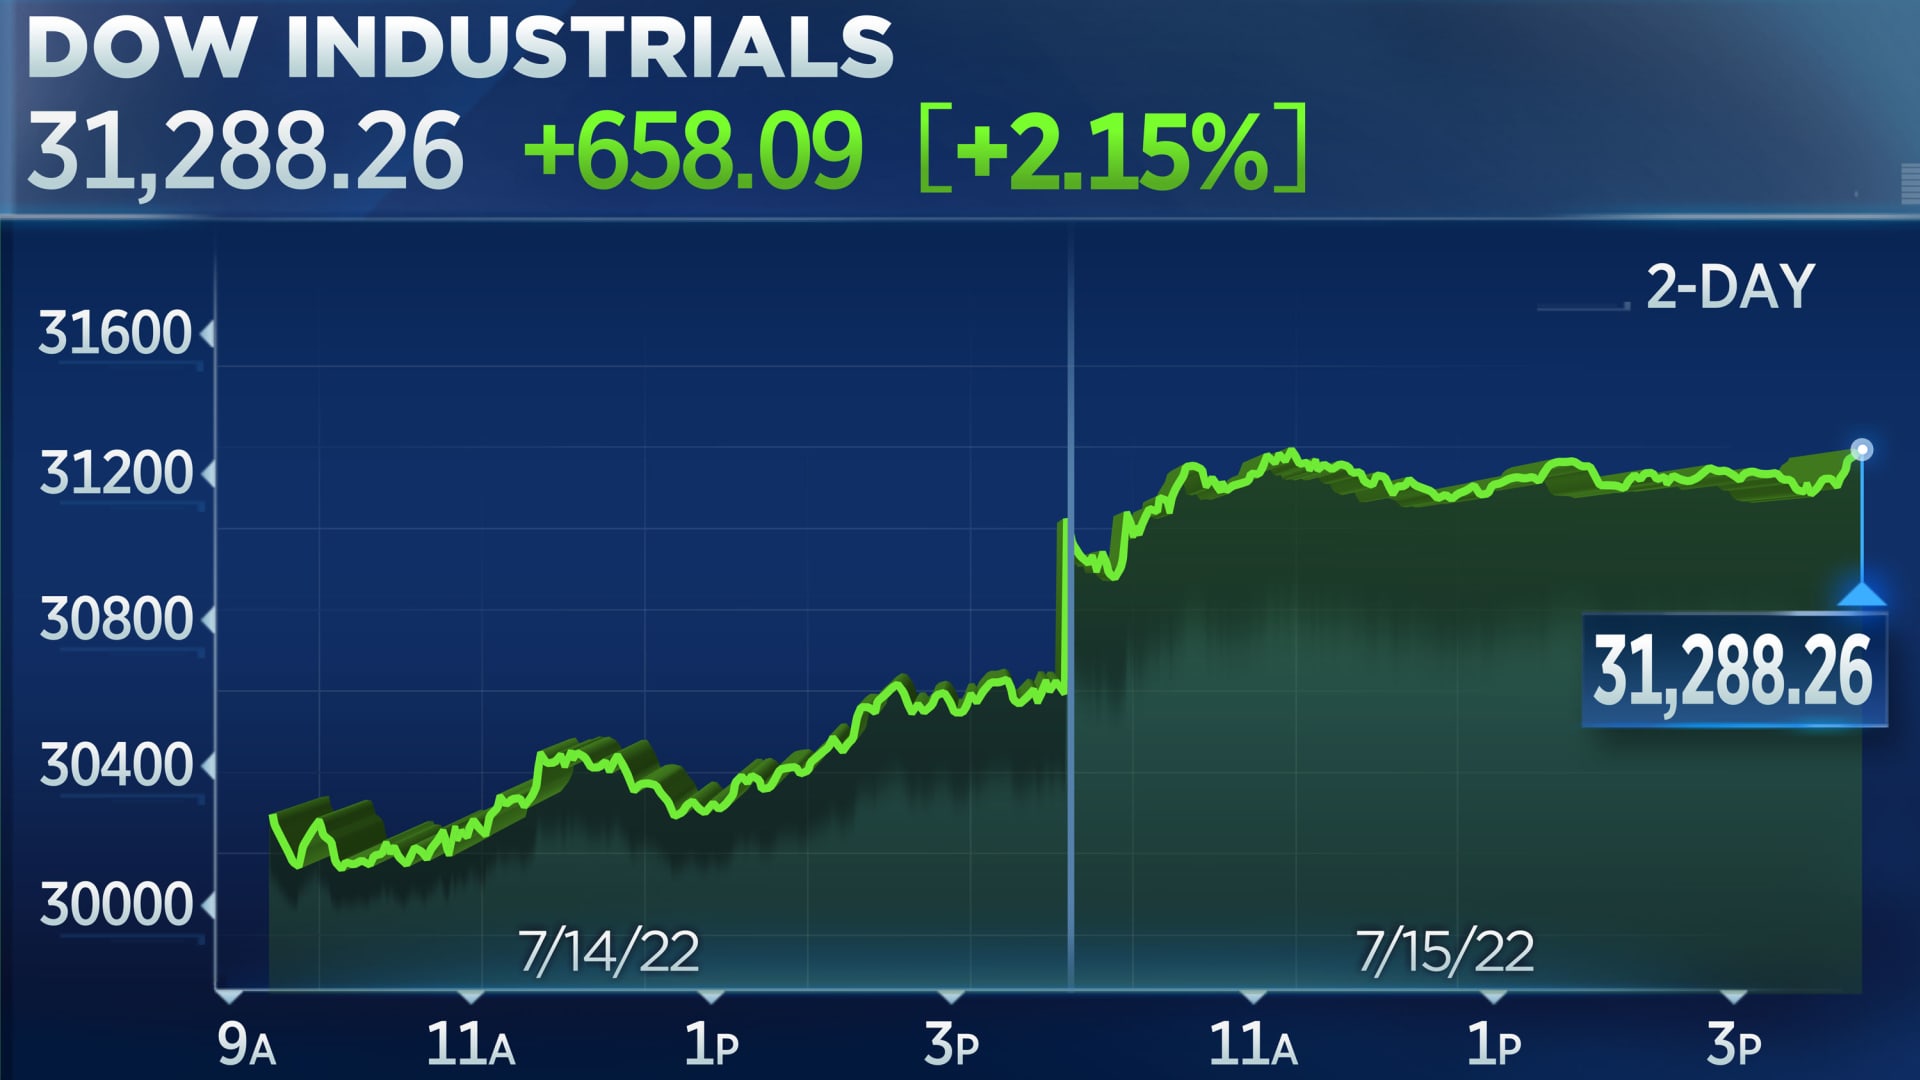 Stocks rose as Wall Street weighed fresh earnings and economic data